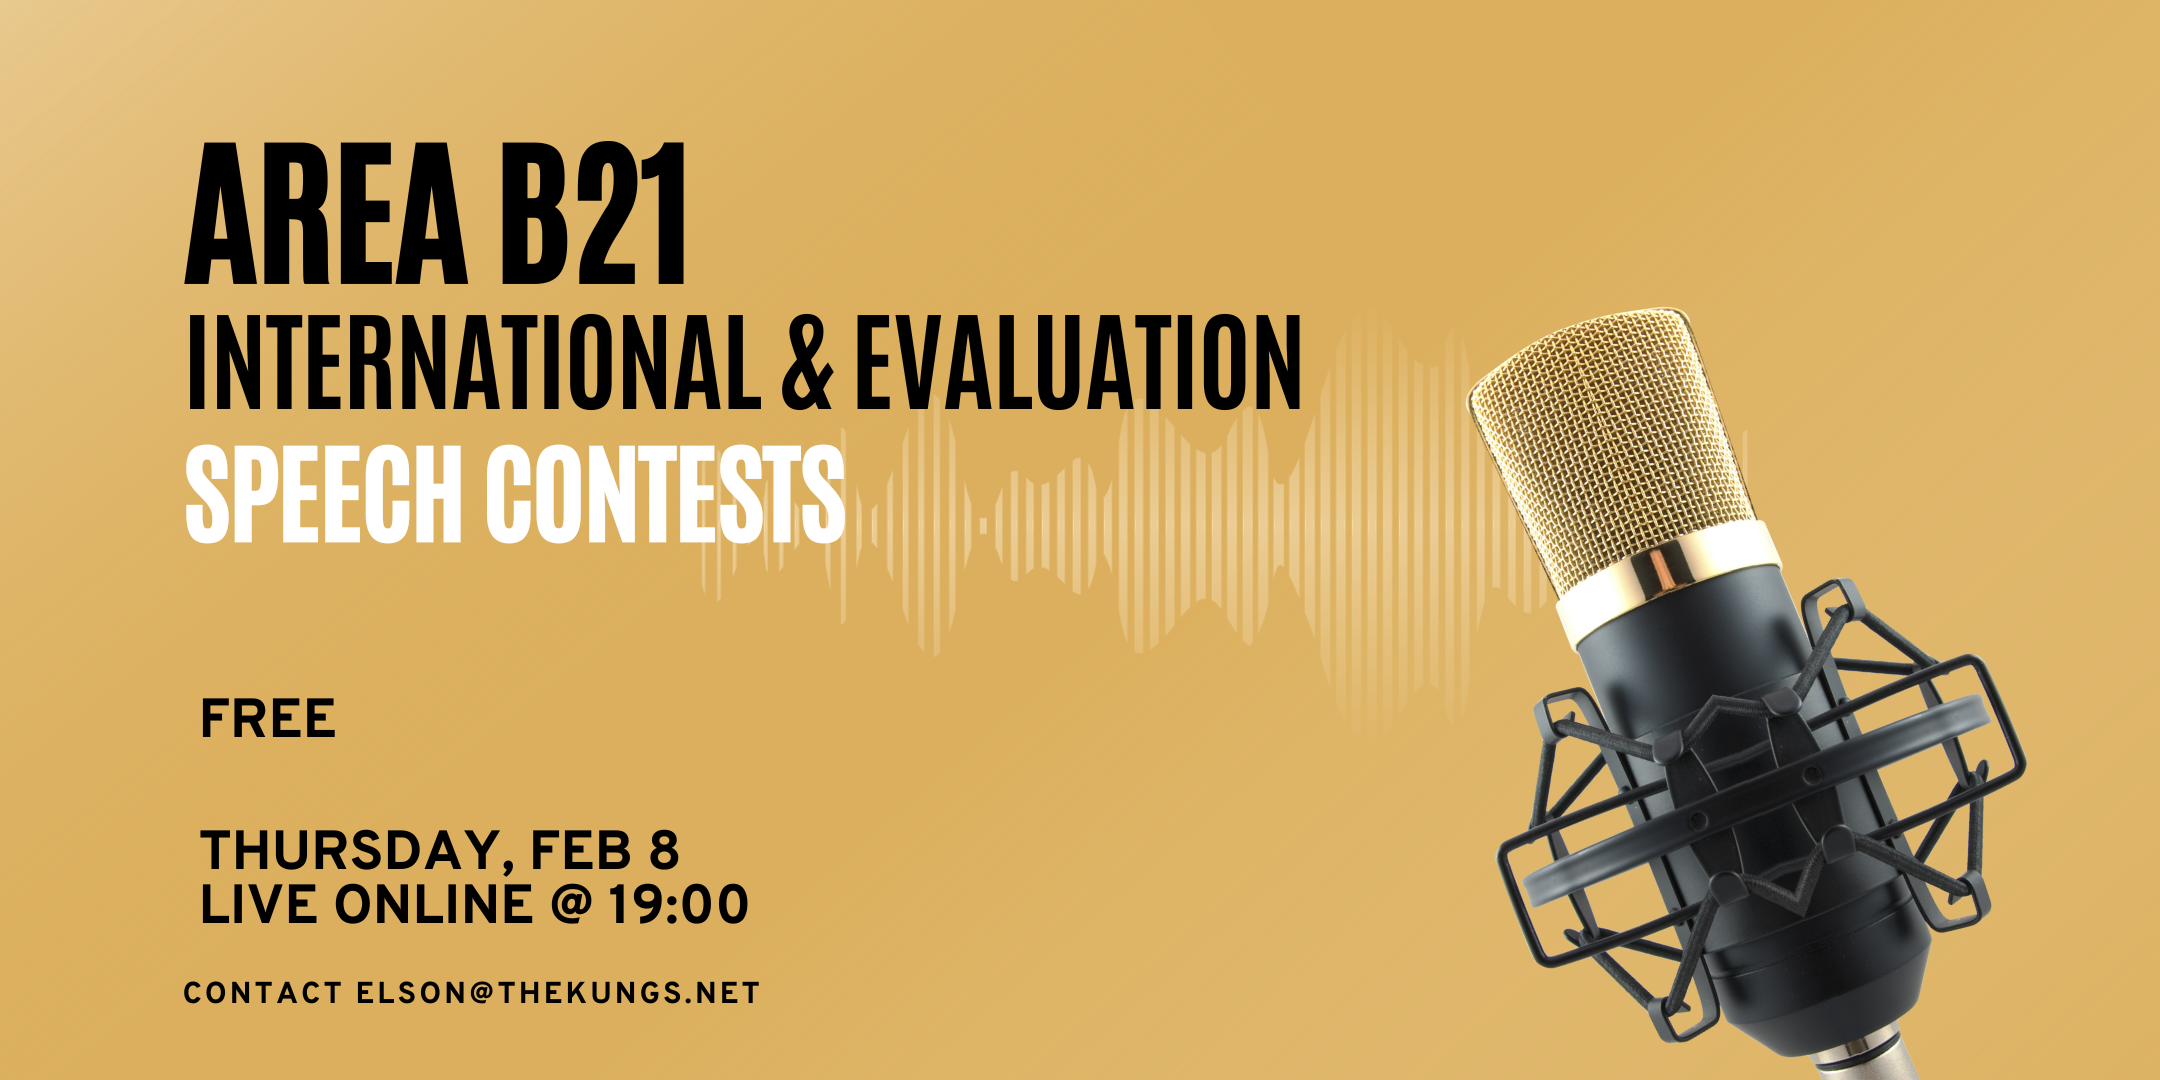 Image with a microphone, the contest name, date and time. Gold background.